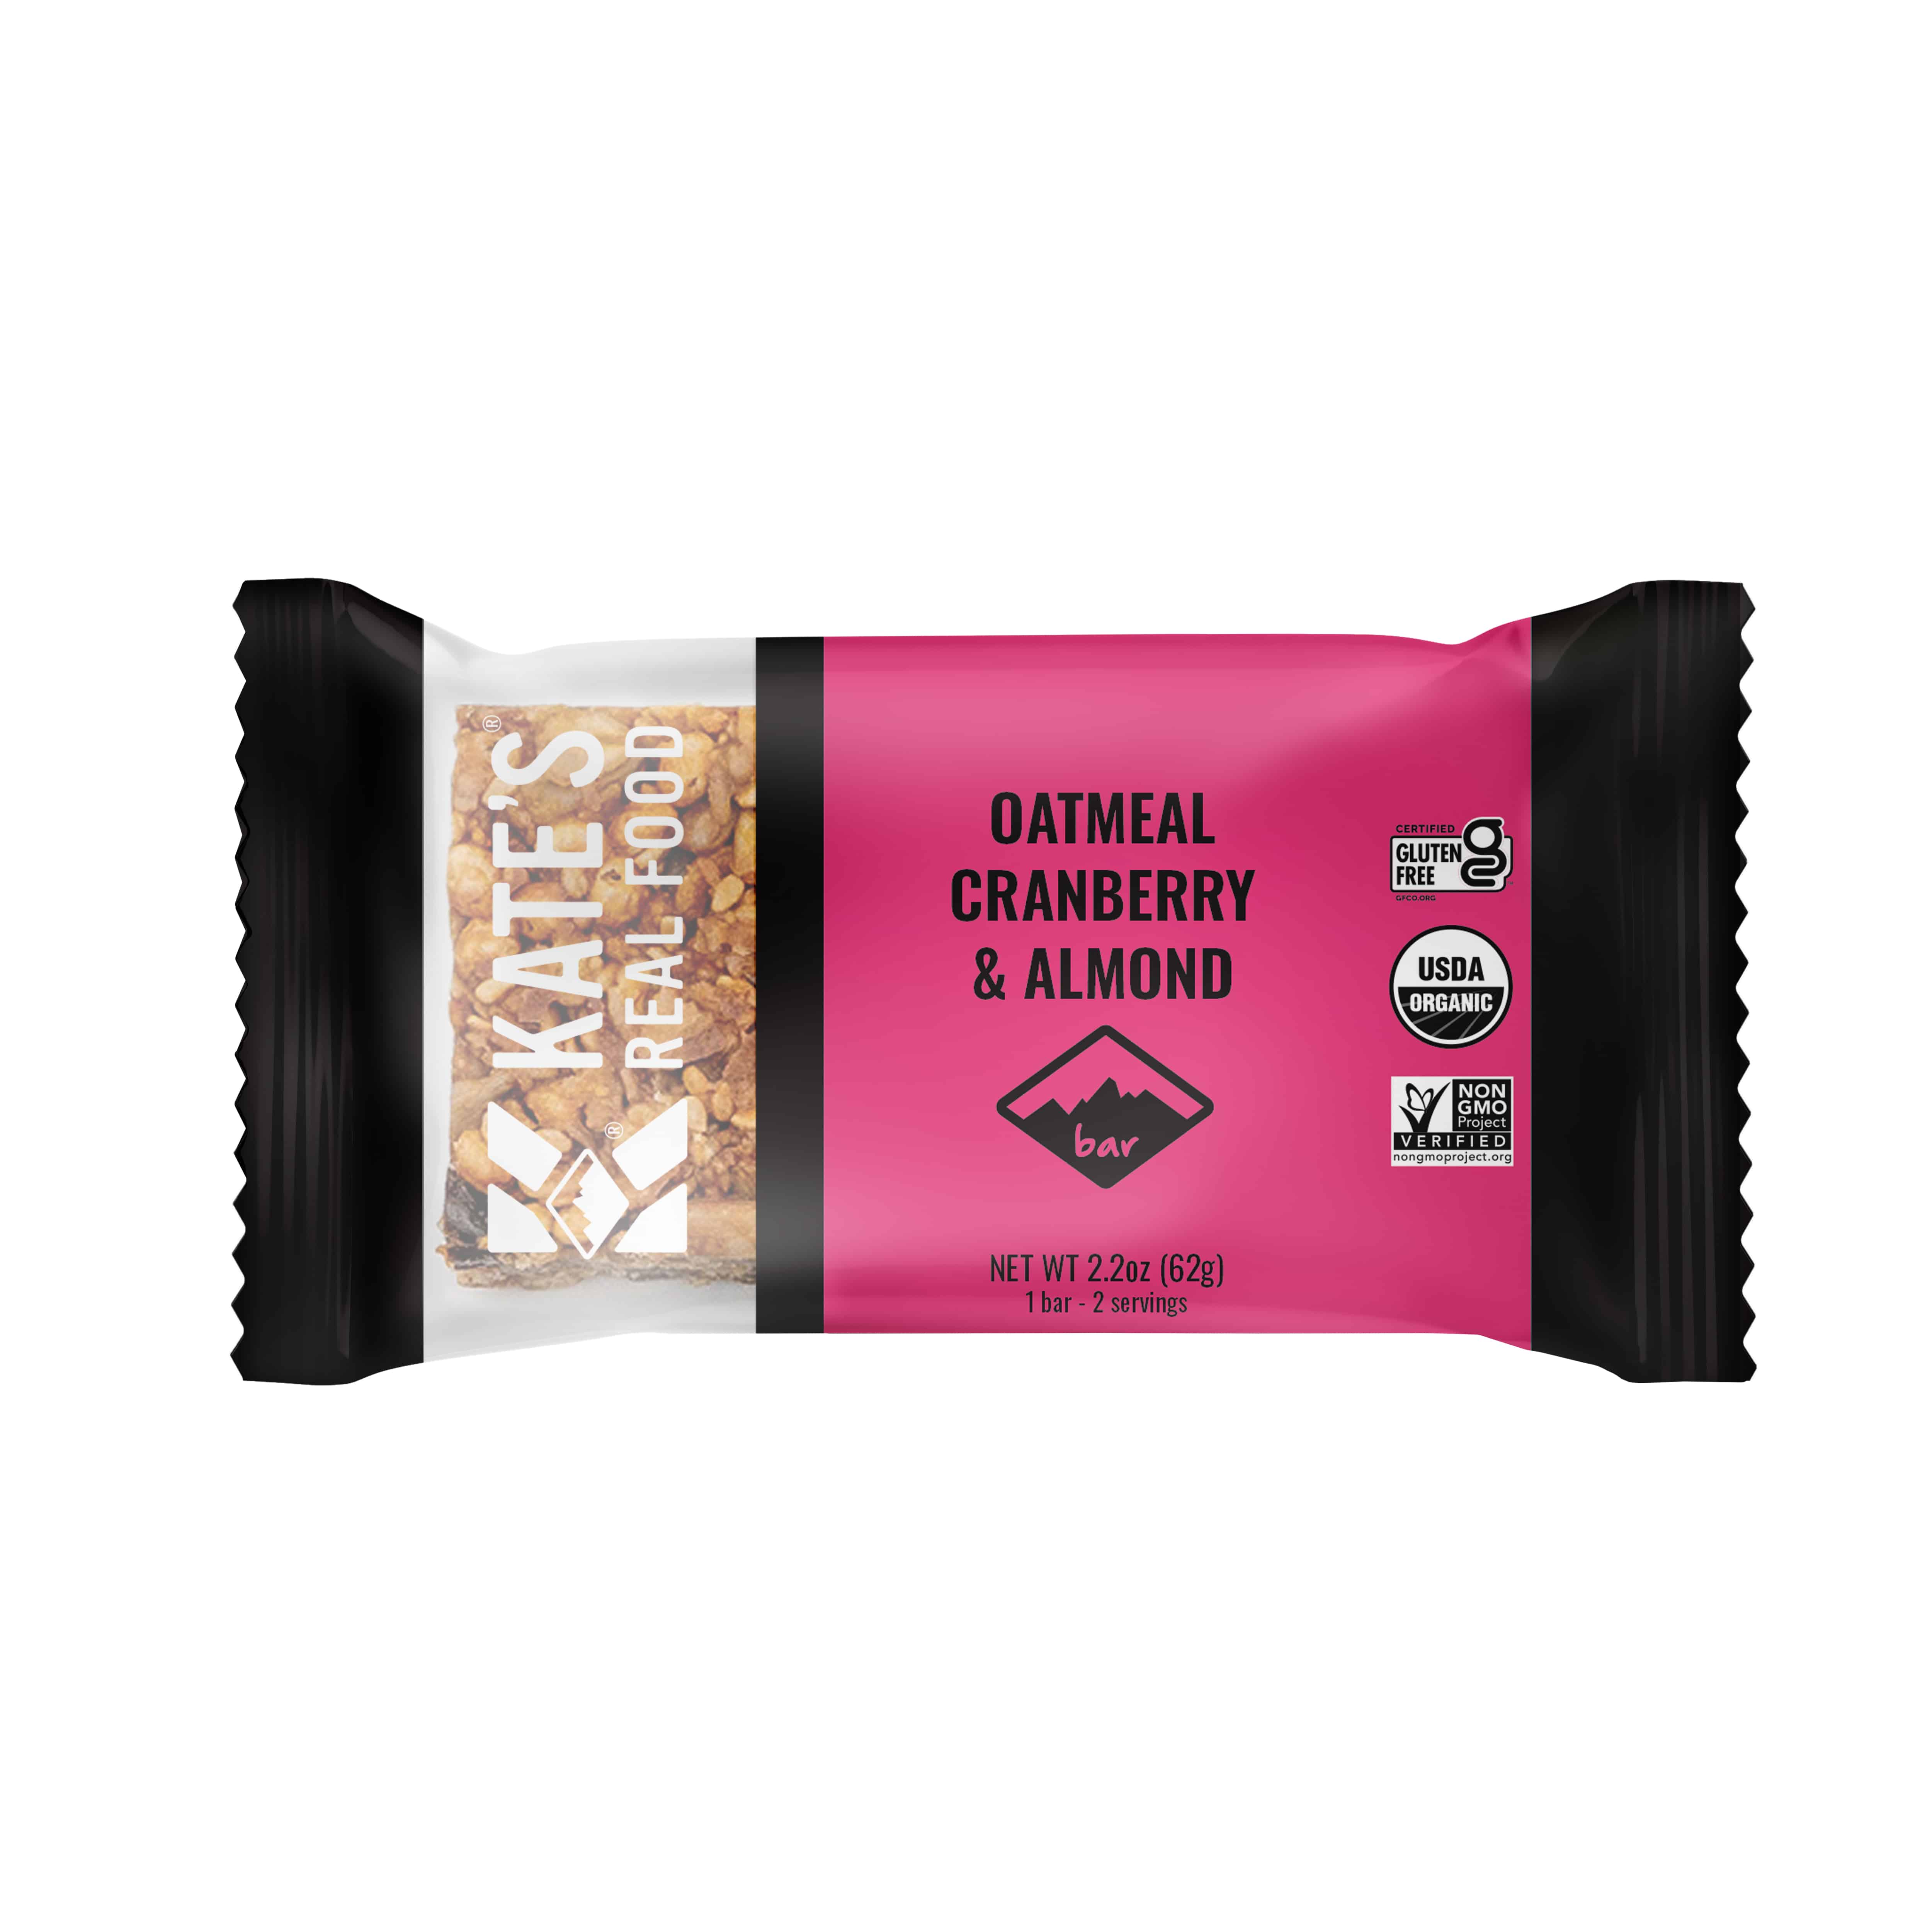 Kate's Real Food Organic Energy Bar - Oatmeal Cranberry Almond 12 innerpacks per case 2.2 oz